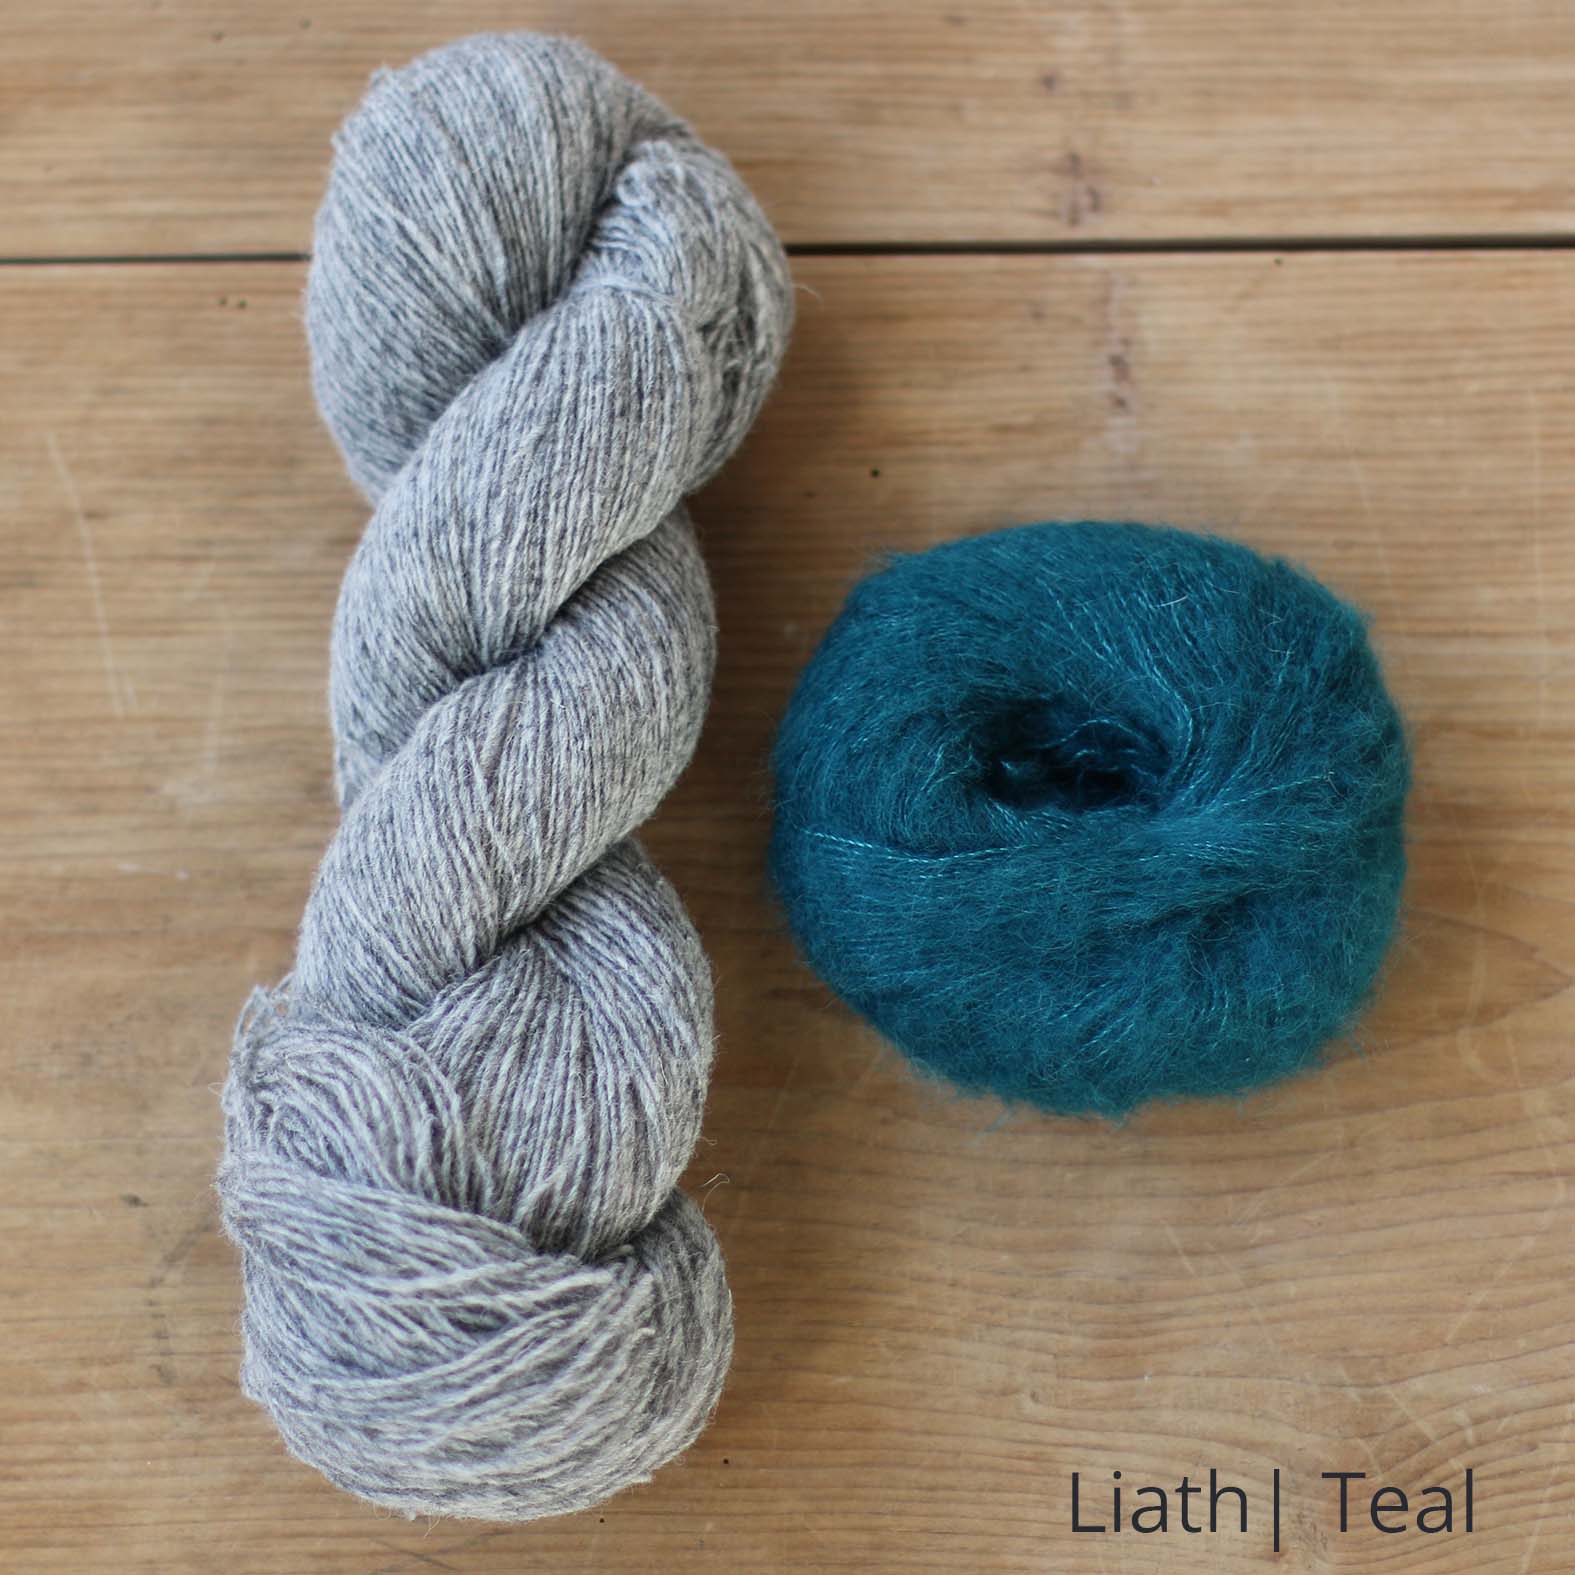 Quilted Feather Yarn Kit